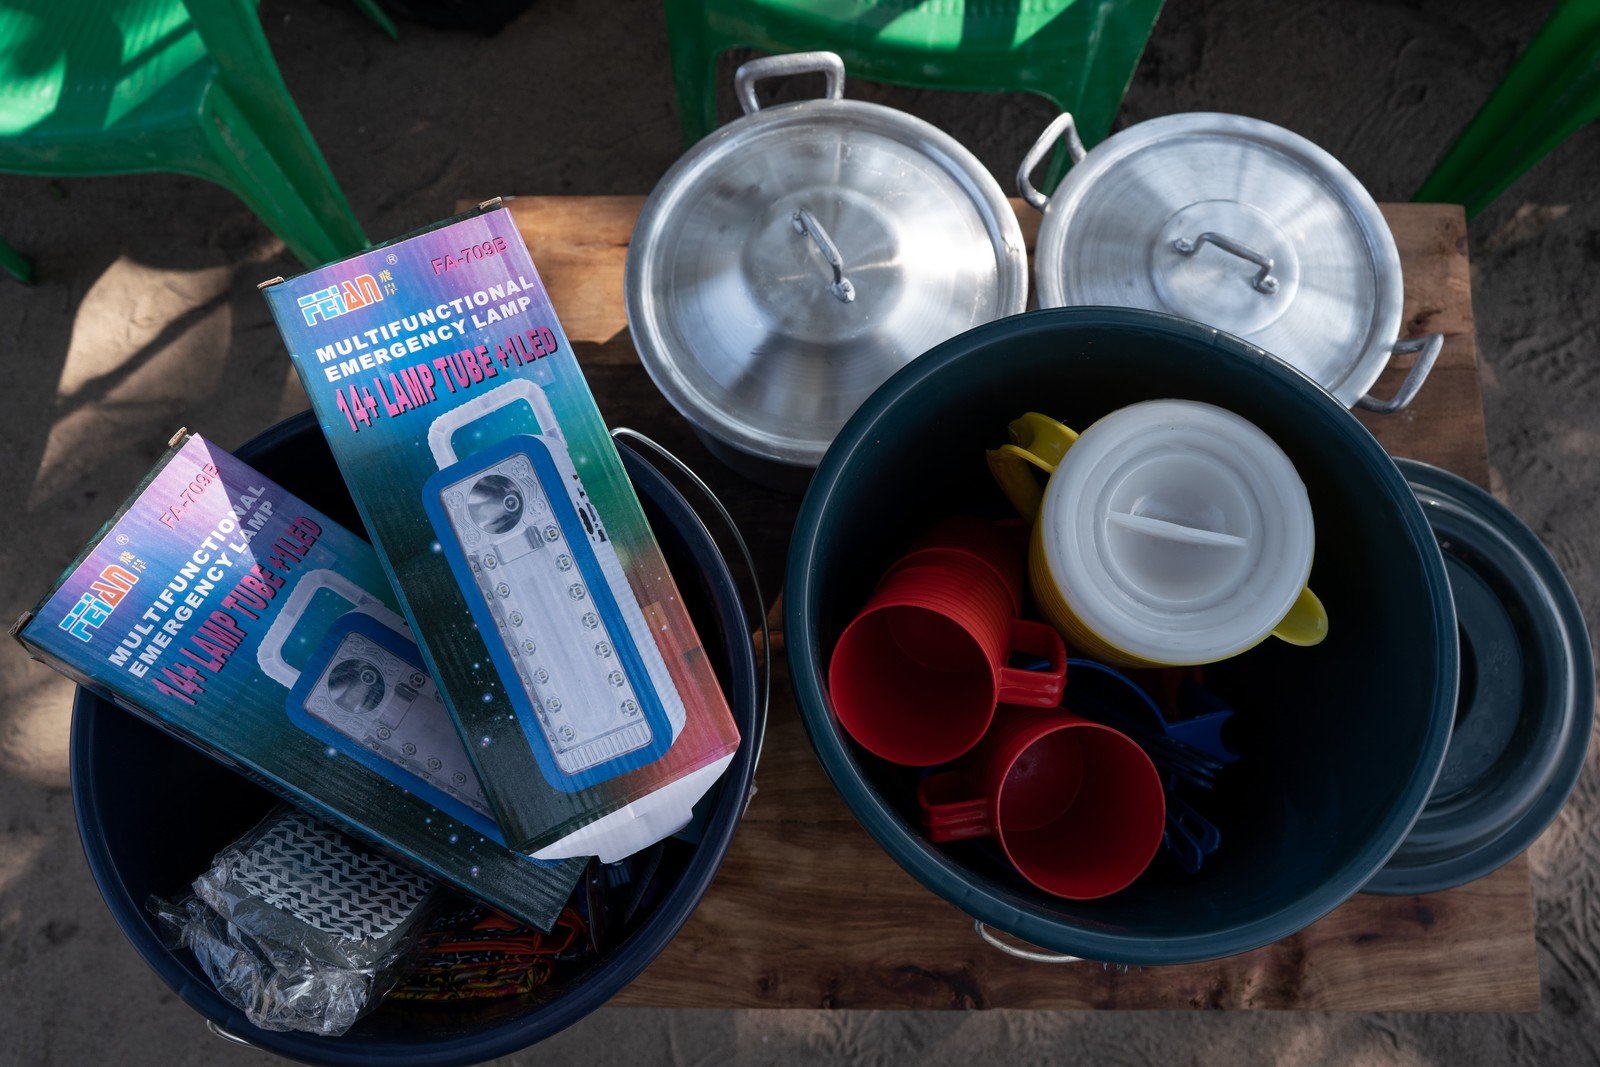 Items inside the hygiene kits and household kits include soap, bucket, toothpaste and toothbrushes, rope, sanitation pads, capulana (Africa traditional clothes), plastic slippers, underpants, two solar lanterns etc. (Photo: Ko Chung Ming / Oxfam Volunteer Photographer)